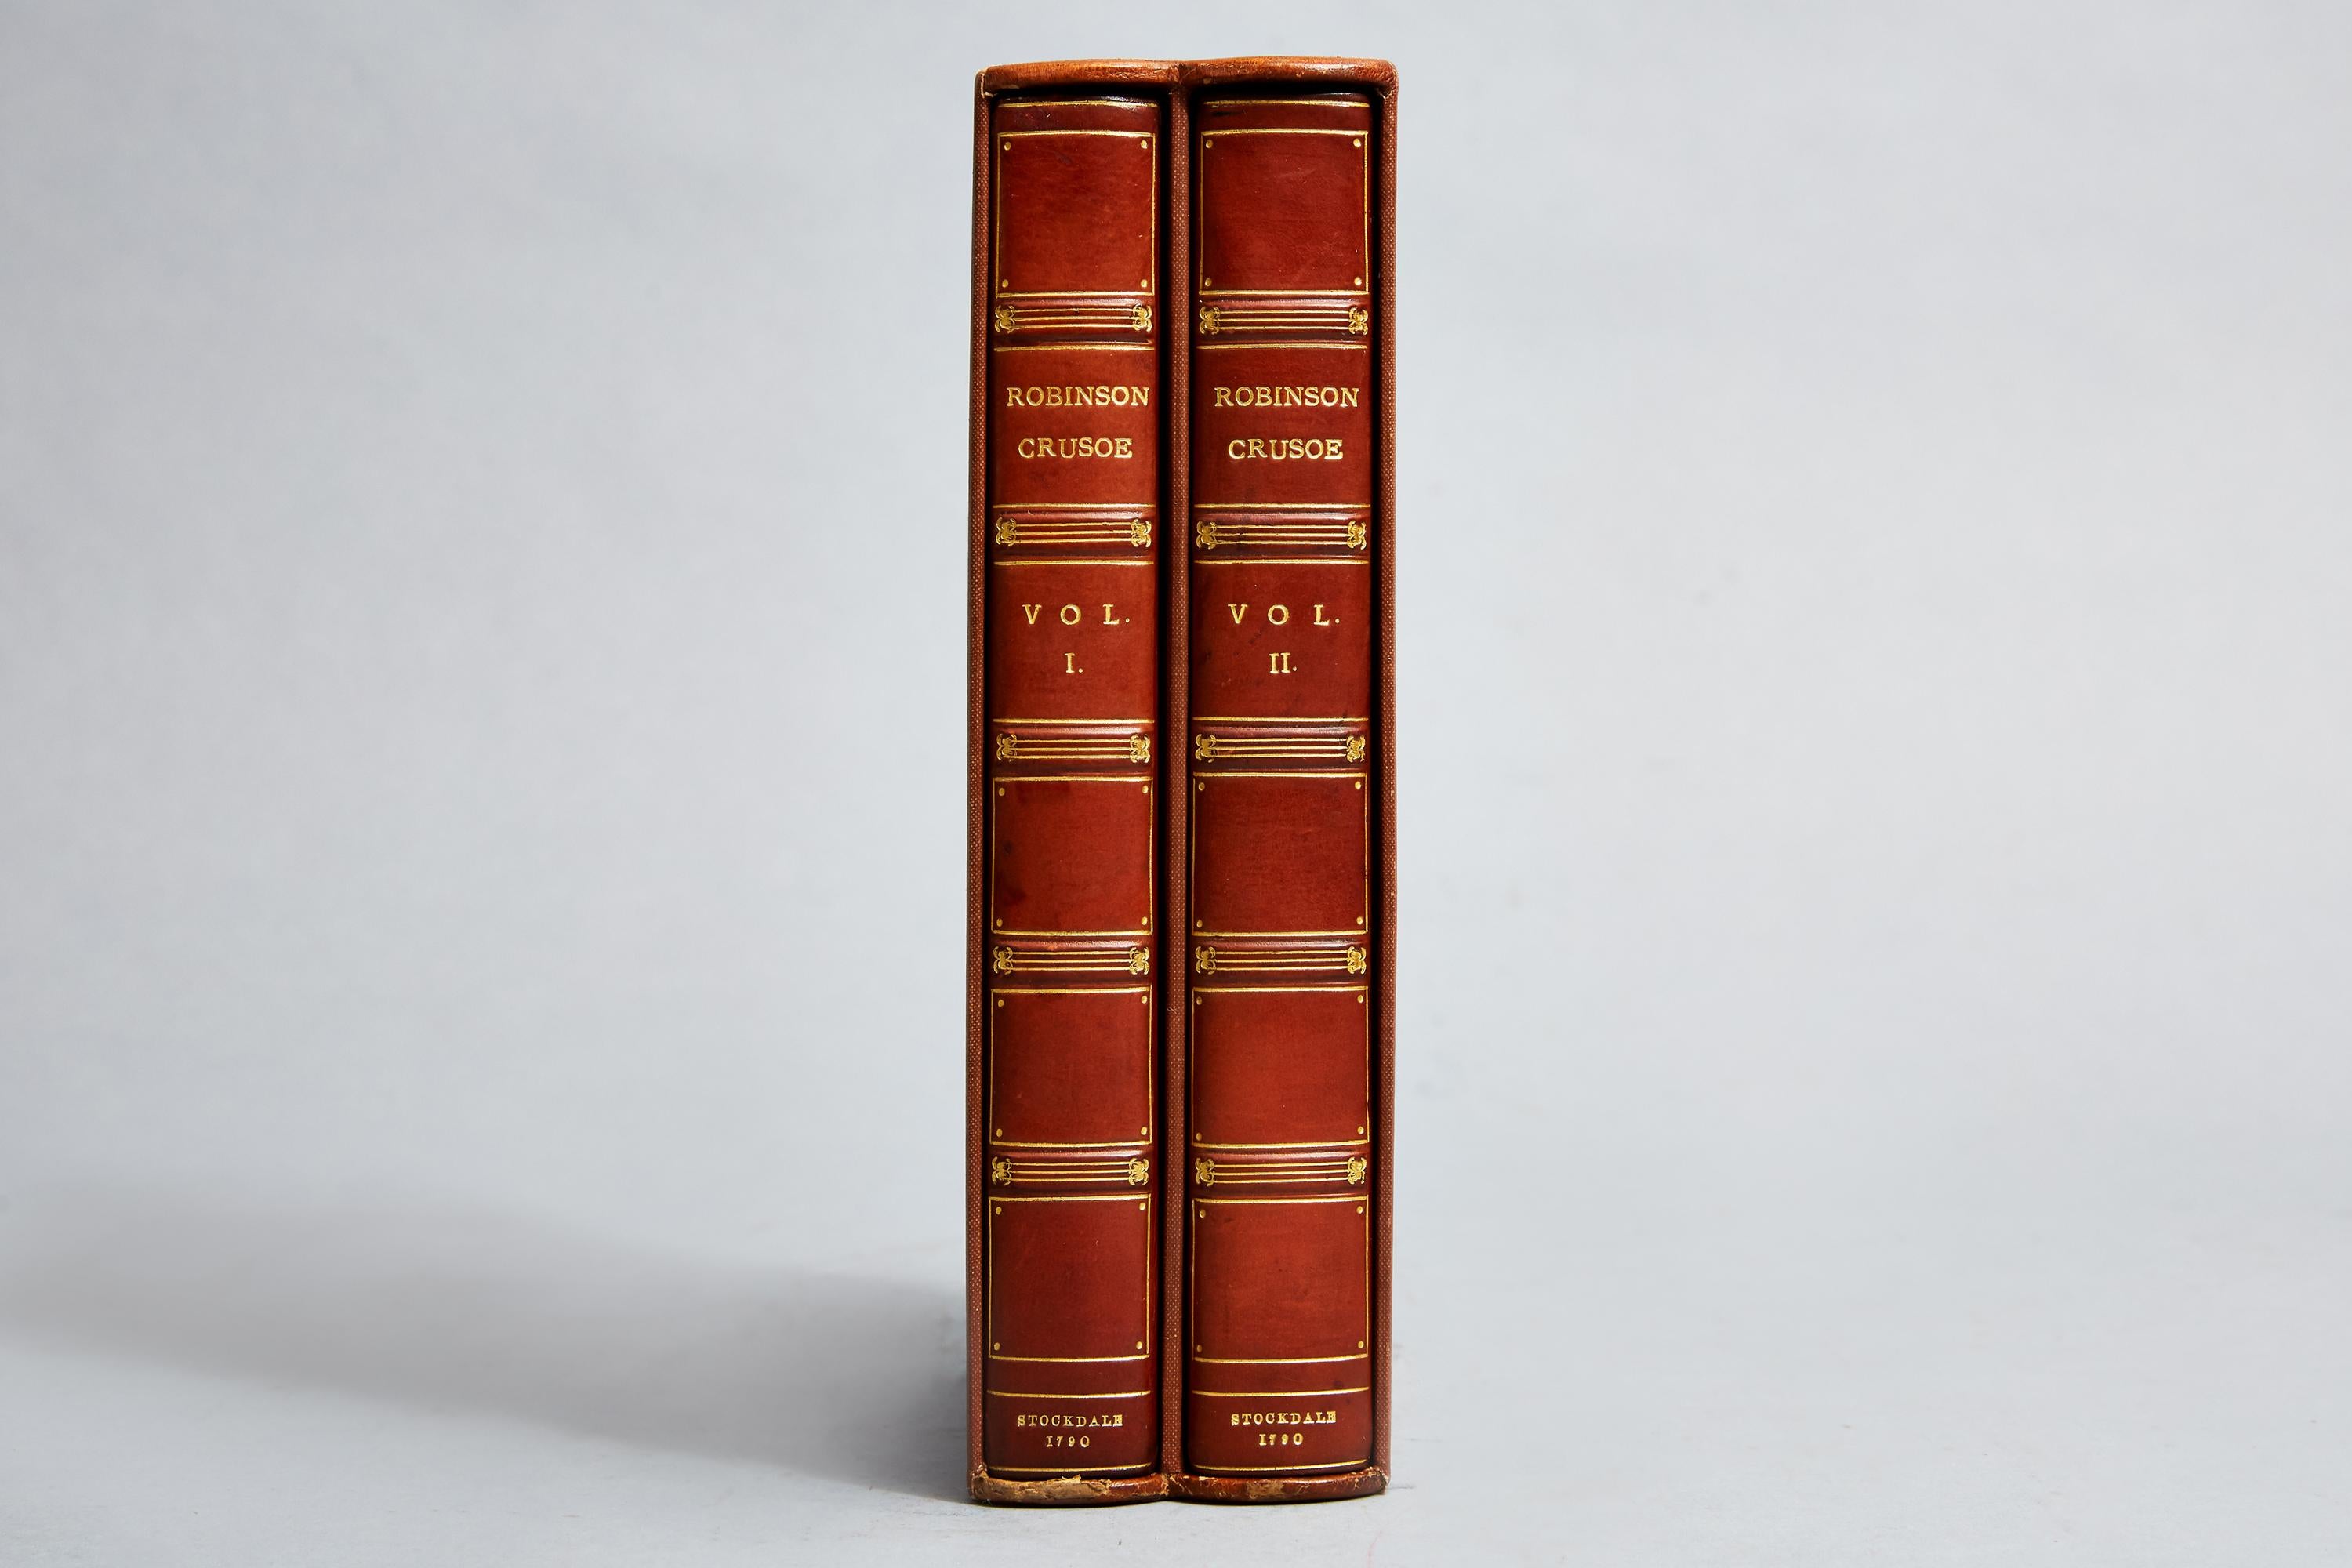 Daniel DeFoe

2 volumes

Bound in full polished calf by Morrell, engraved frontispiece and vignette title pages. Illustrated with 12 plates by Thomas Stothard, all edges gilt, raised bands, gilt panels.

First edition

In a fleece